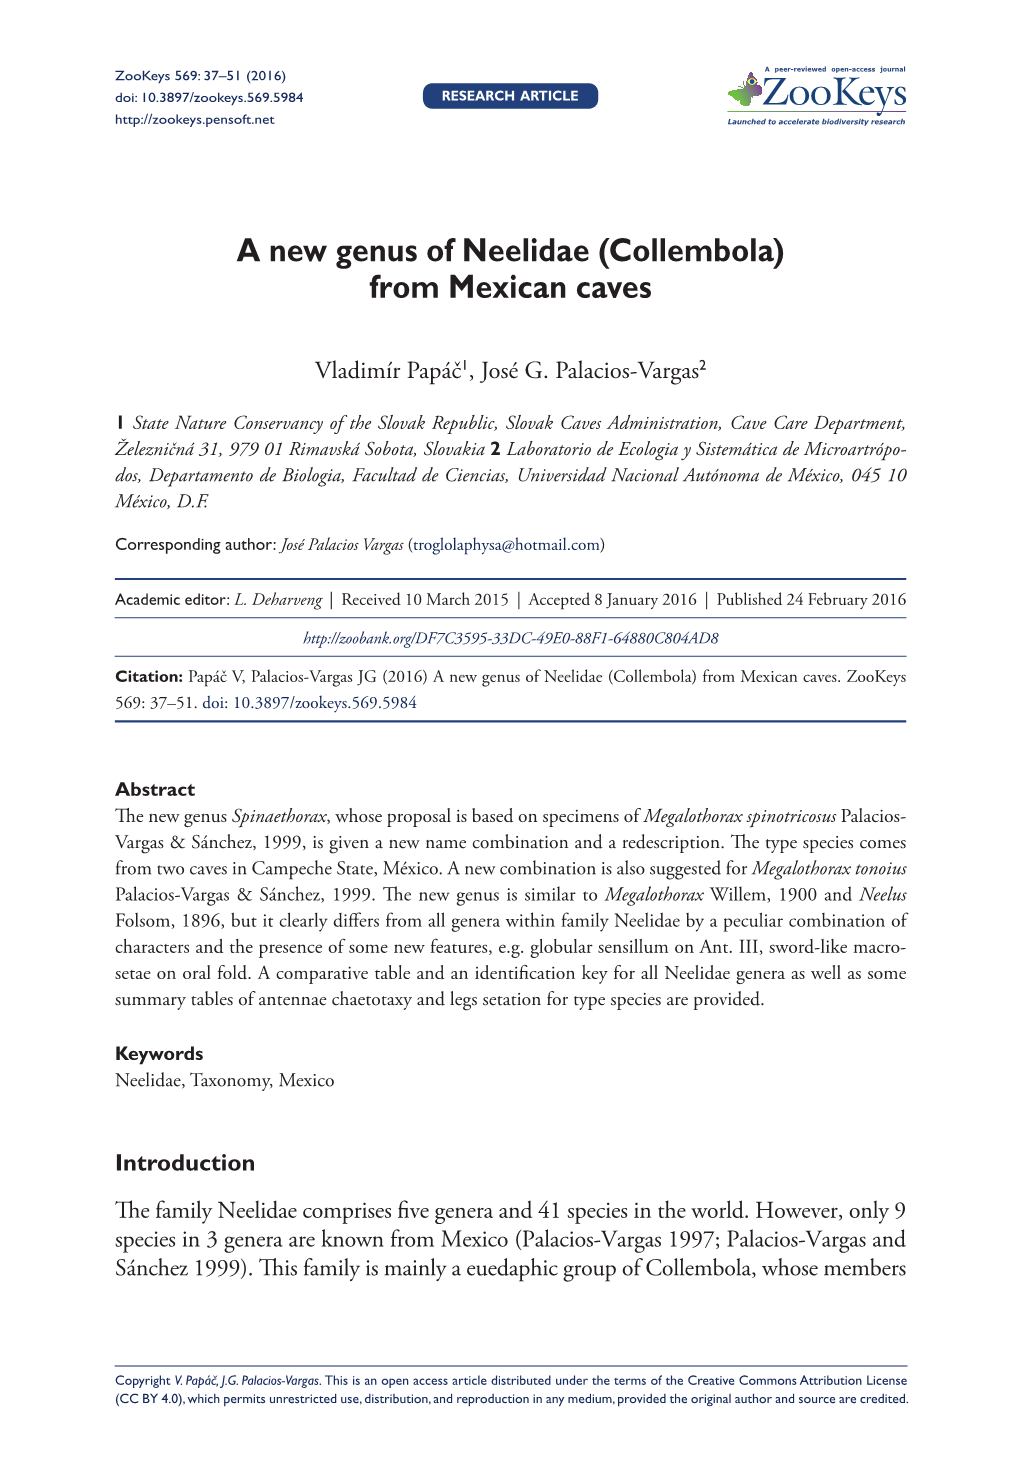 ﻿A New Genus of Neelidae (Collembola) from Mexican Caves